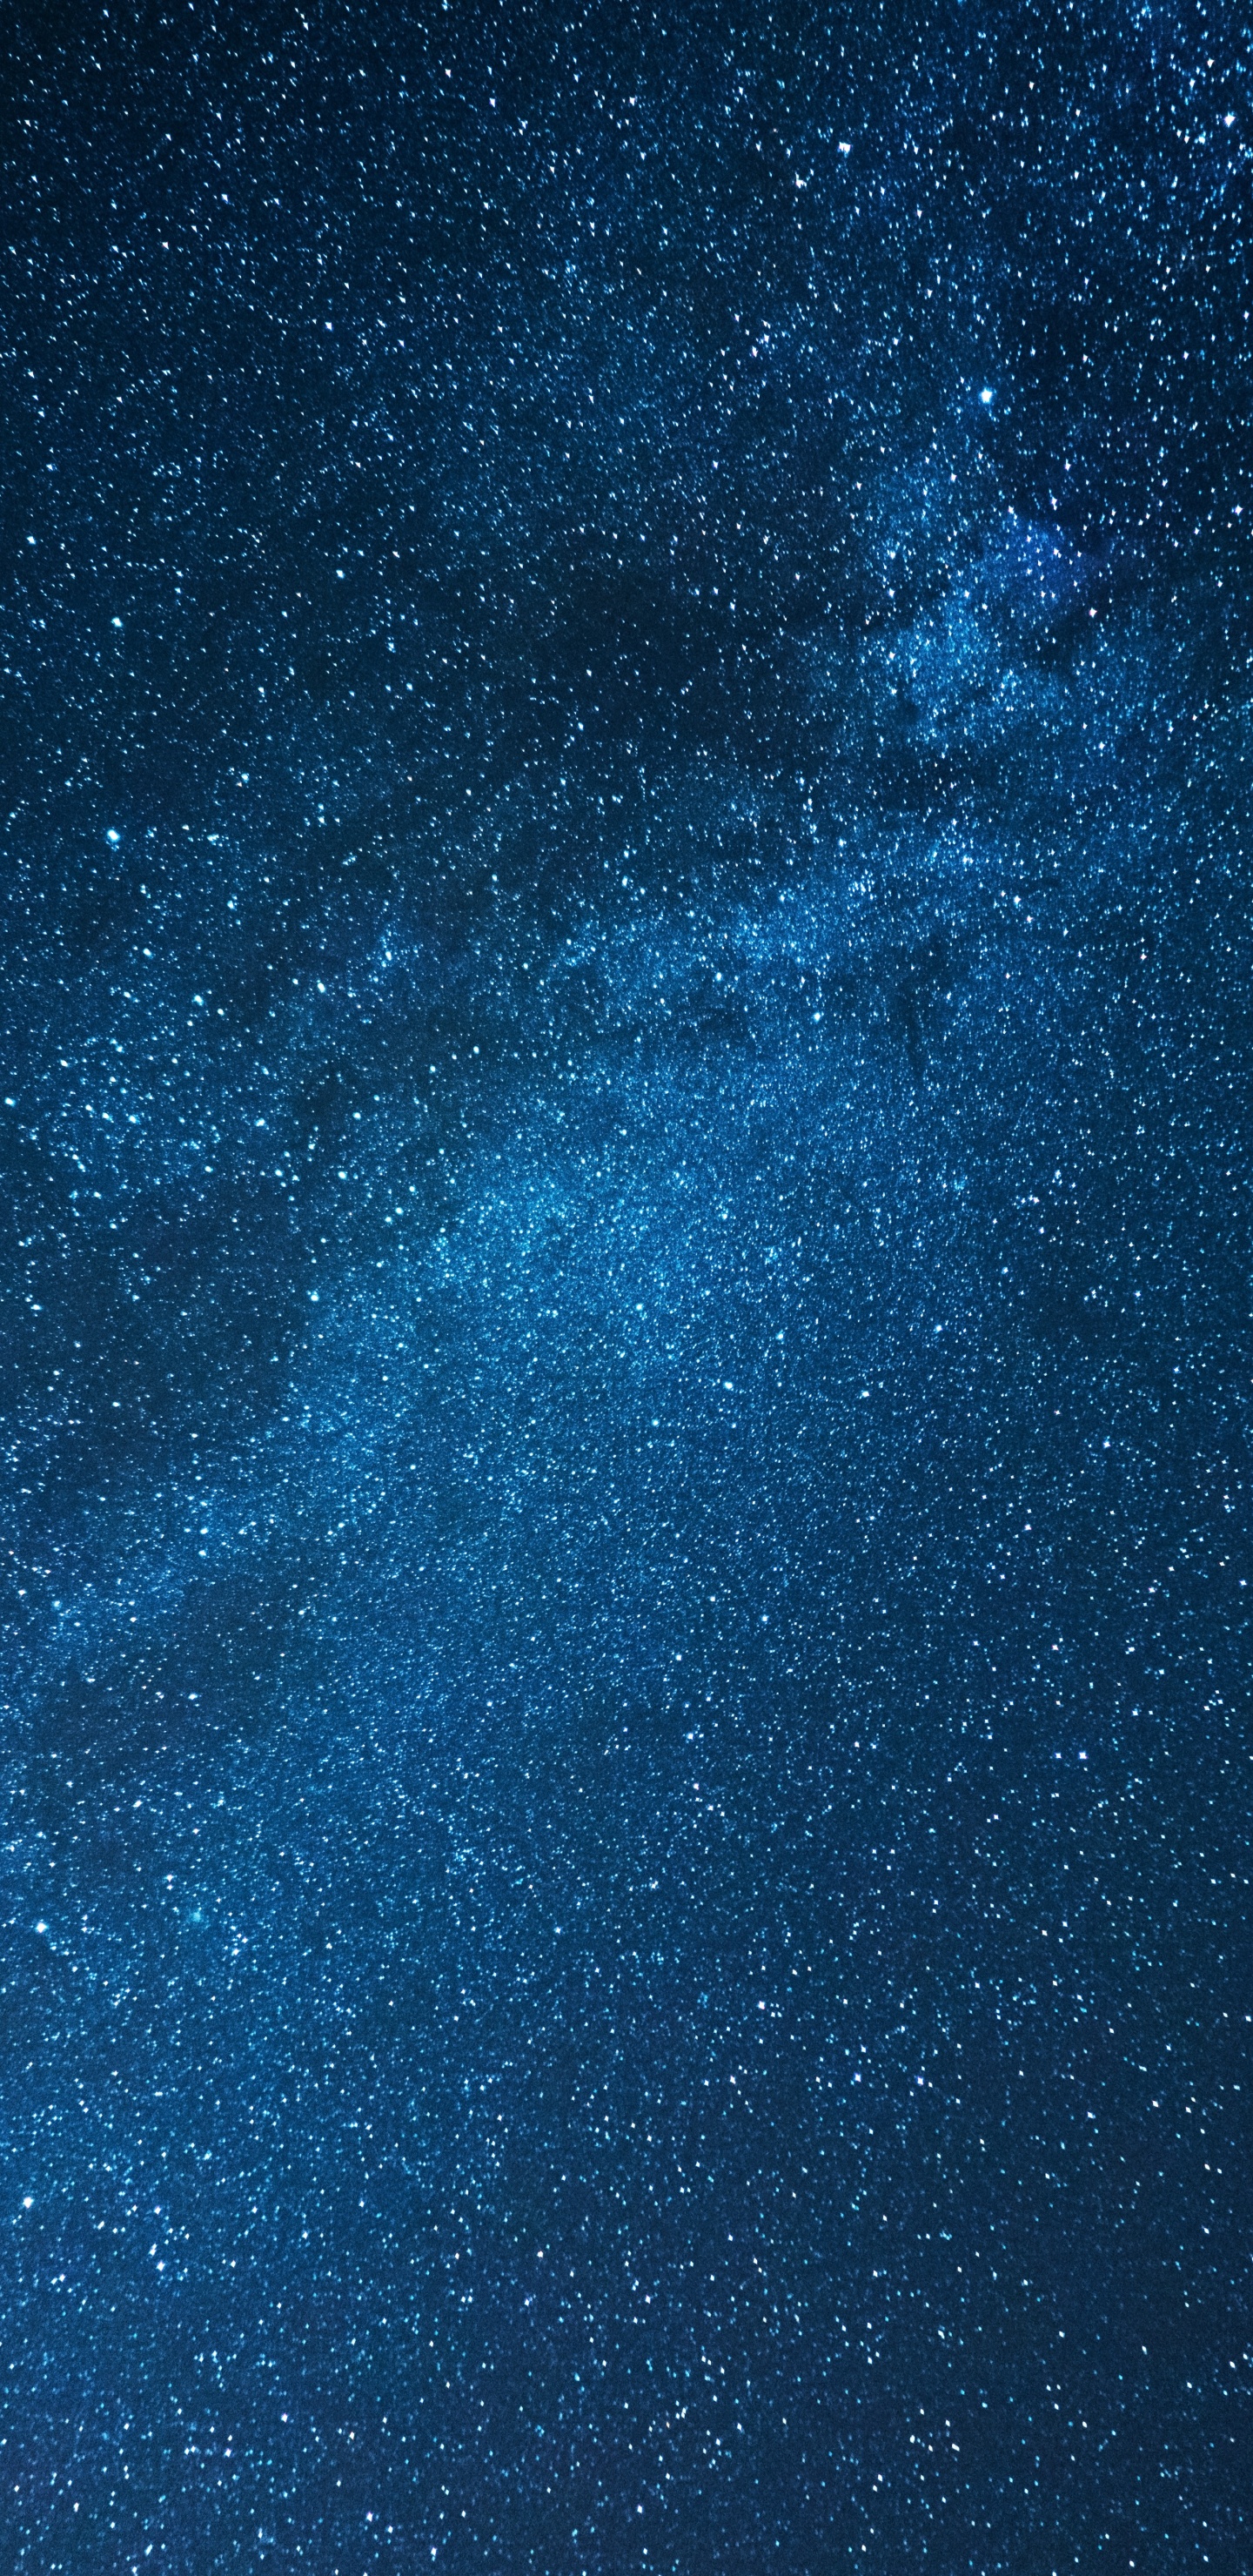 Blue and White Starry Night Sky. Wallpaper in 1440x2960 Resolution